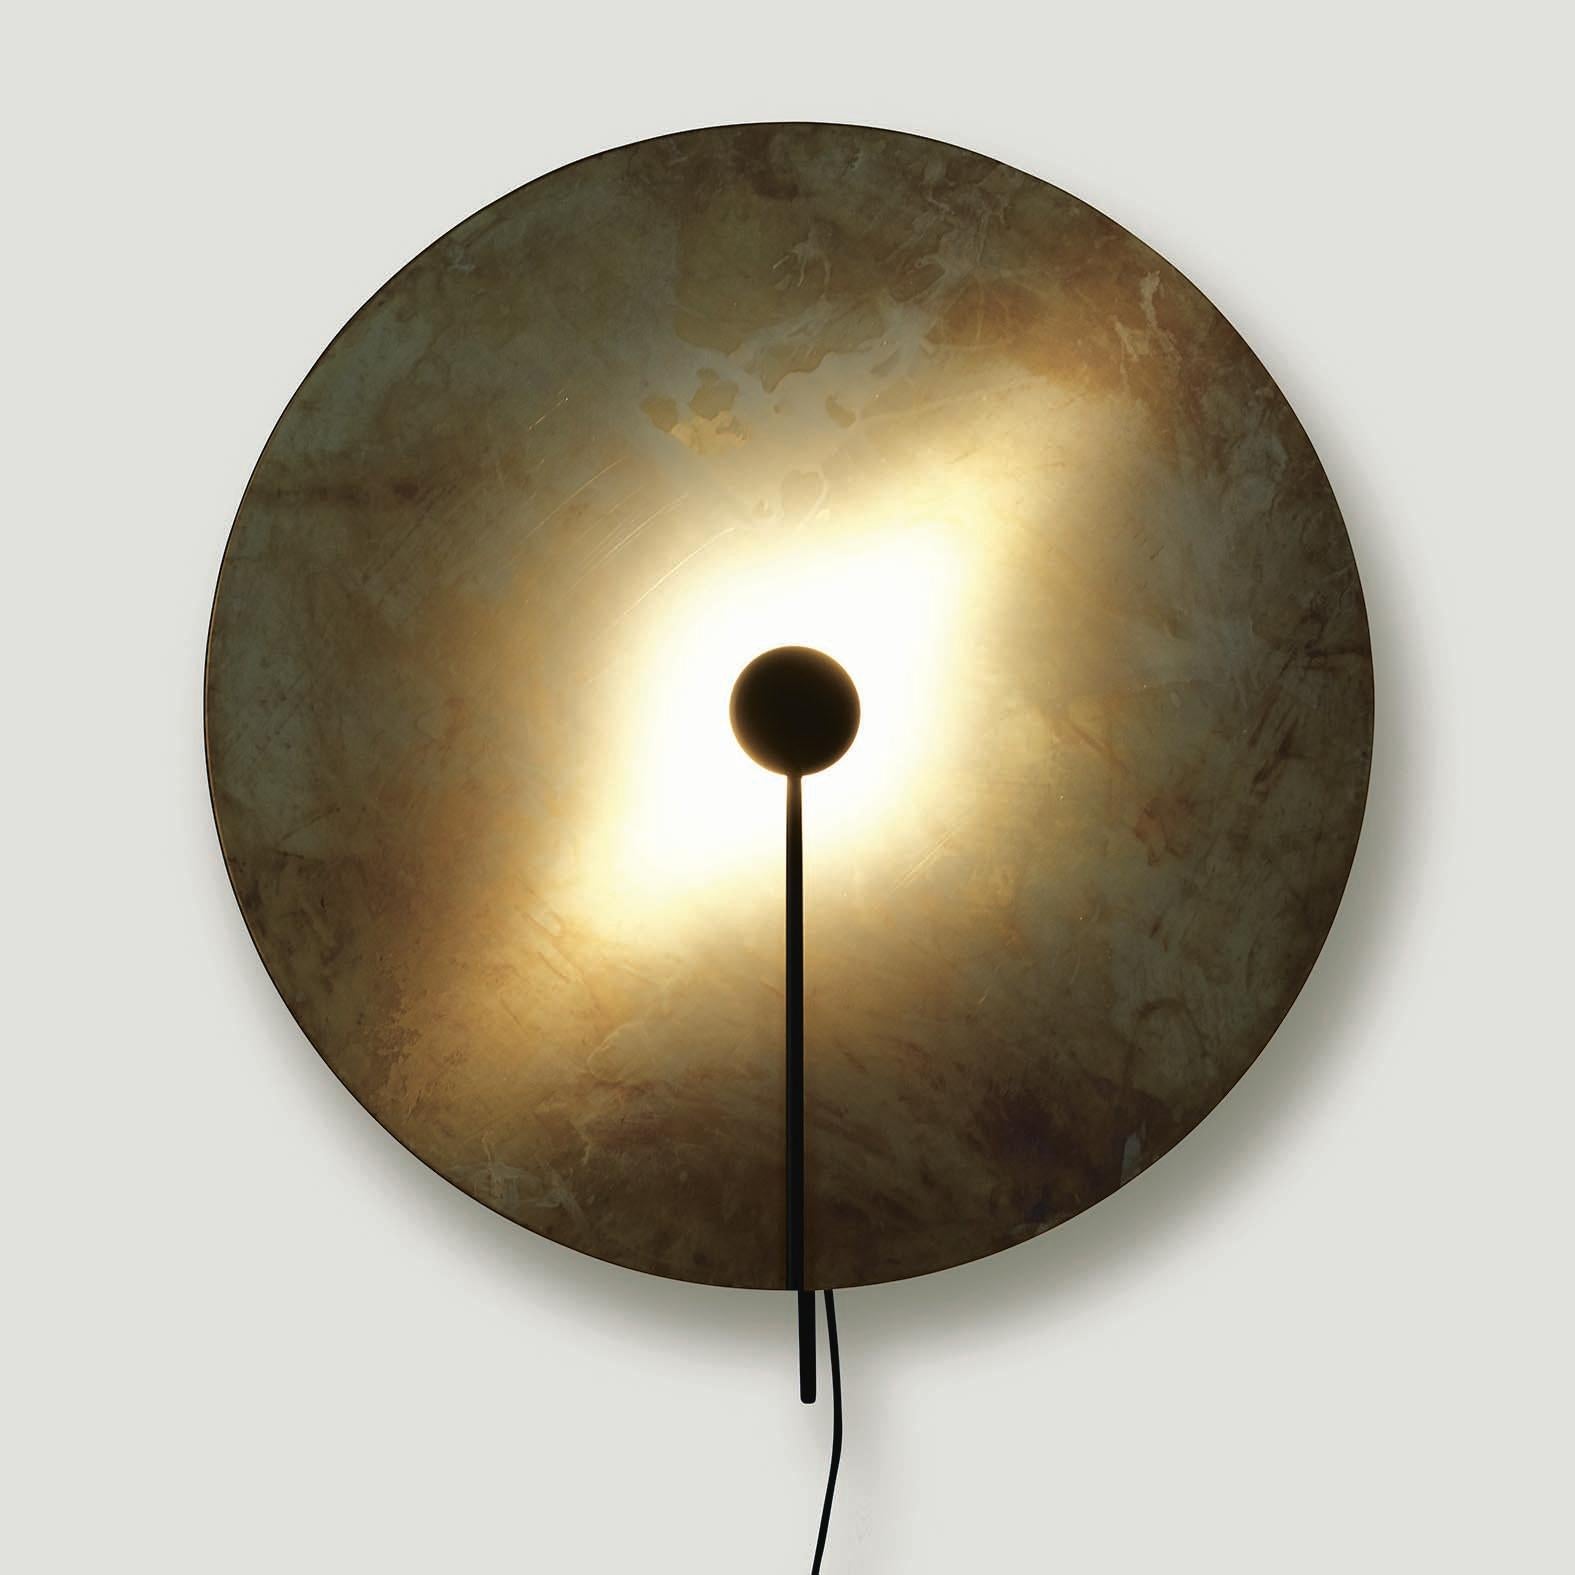 Wall lamp model SOL designed by Sami Kallio and manufactured by Konsthantverk.

The production of lamps, wall lights and floor lamps are manufactured using craftsman’s techniques with the same materials and techniques as the first models.

Materials